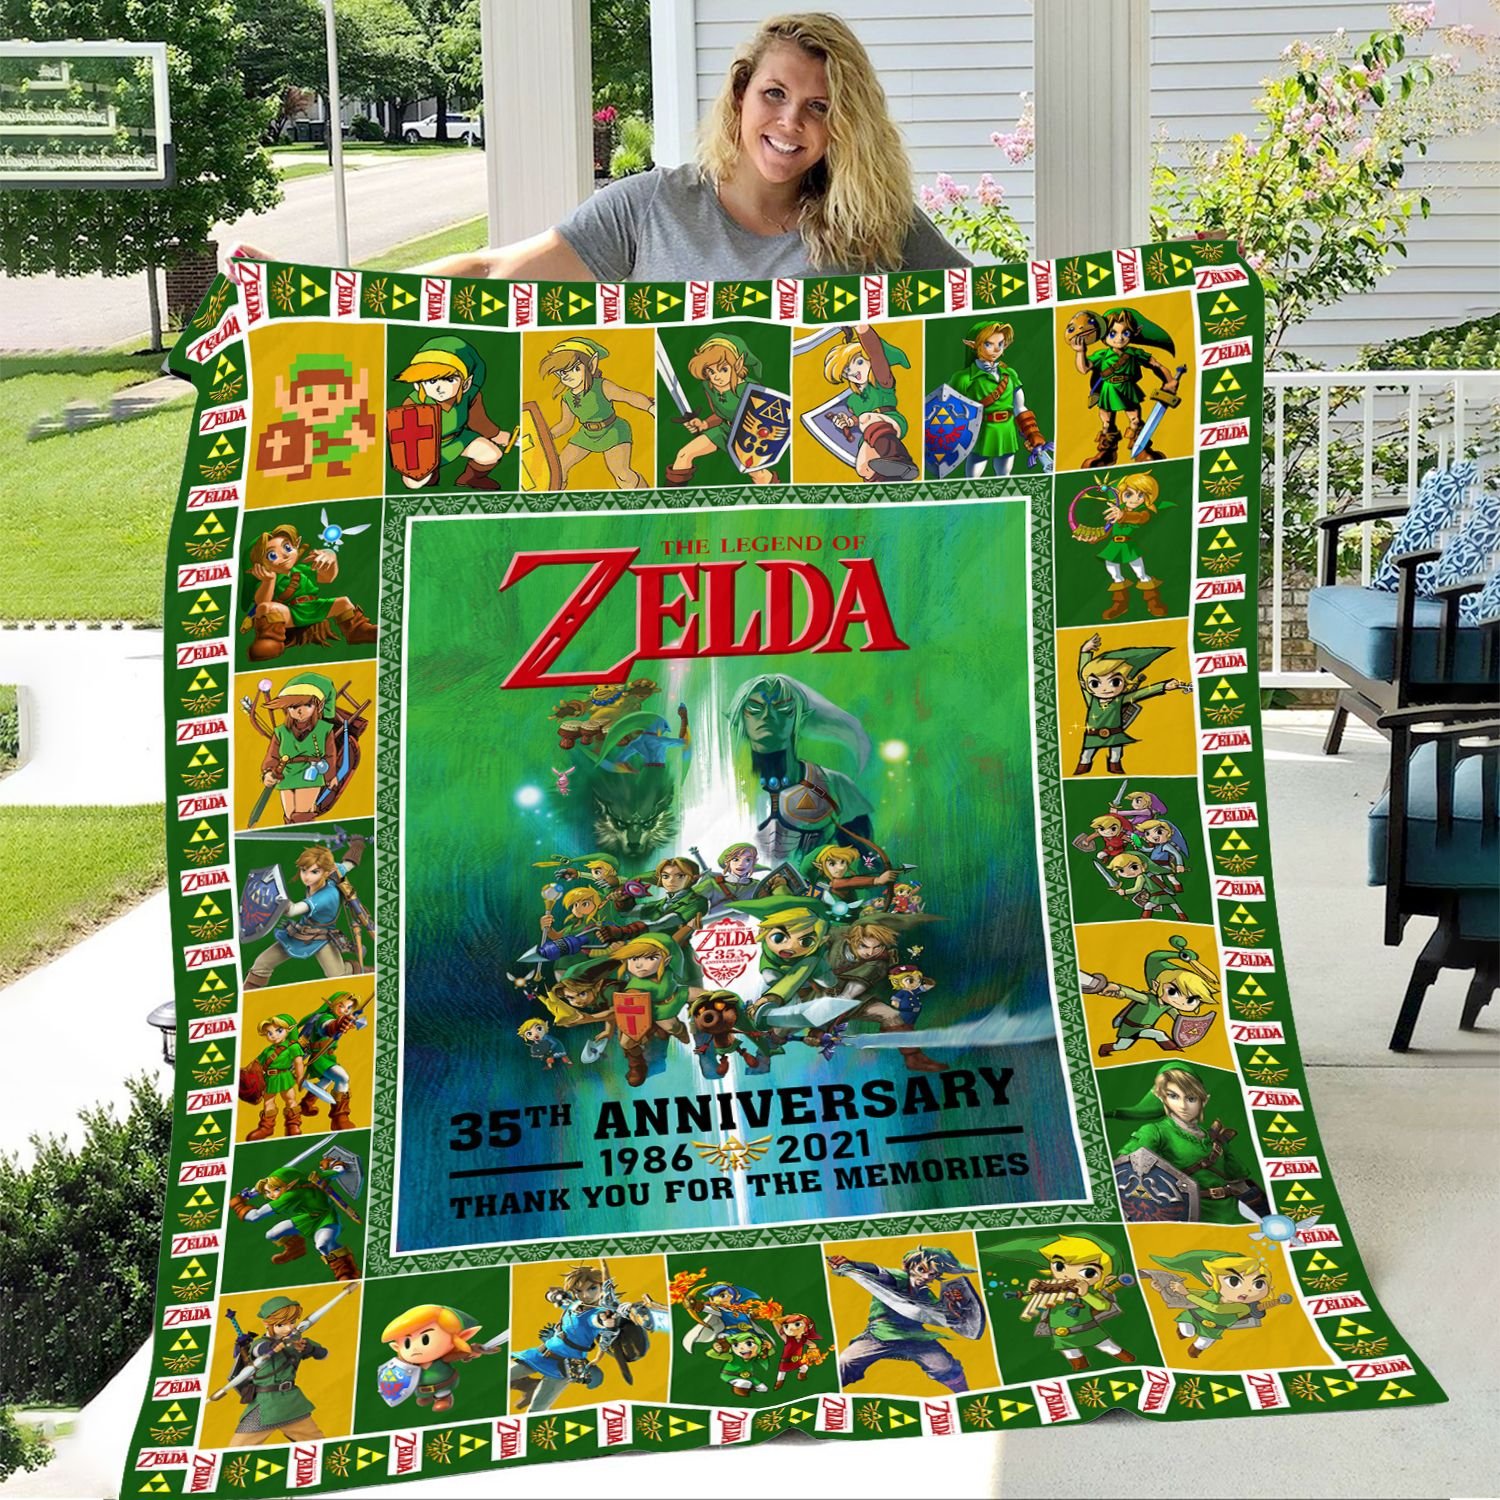 The legends of Zelda 35th anniversary thank you for the memories blanket 9